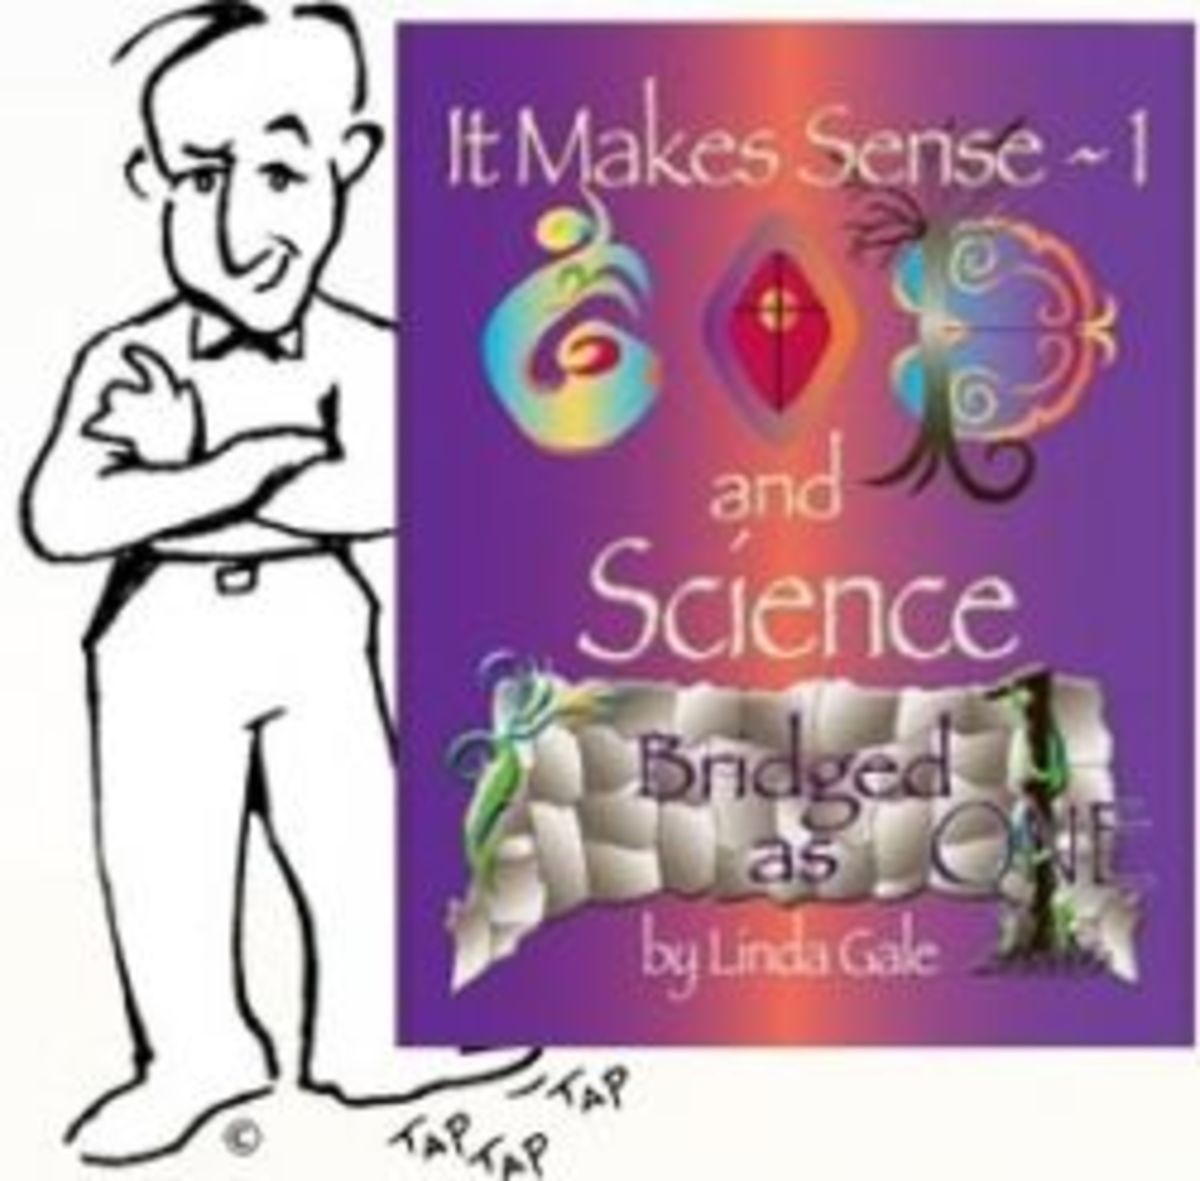 god-and-science-bridged-as-one